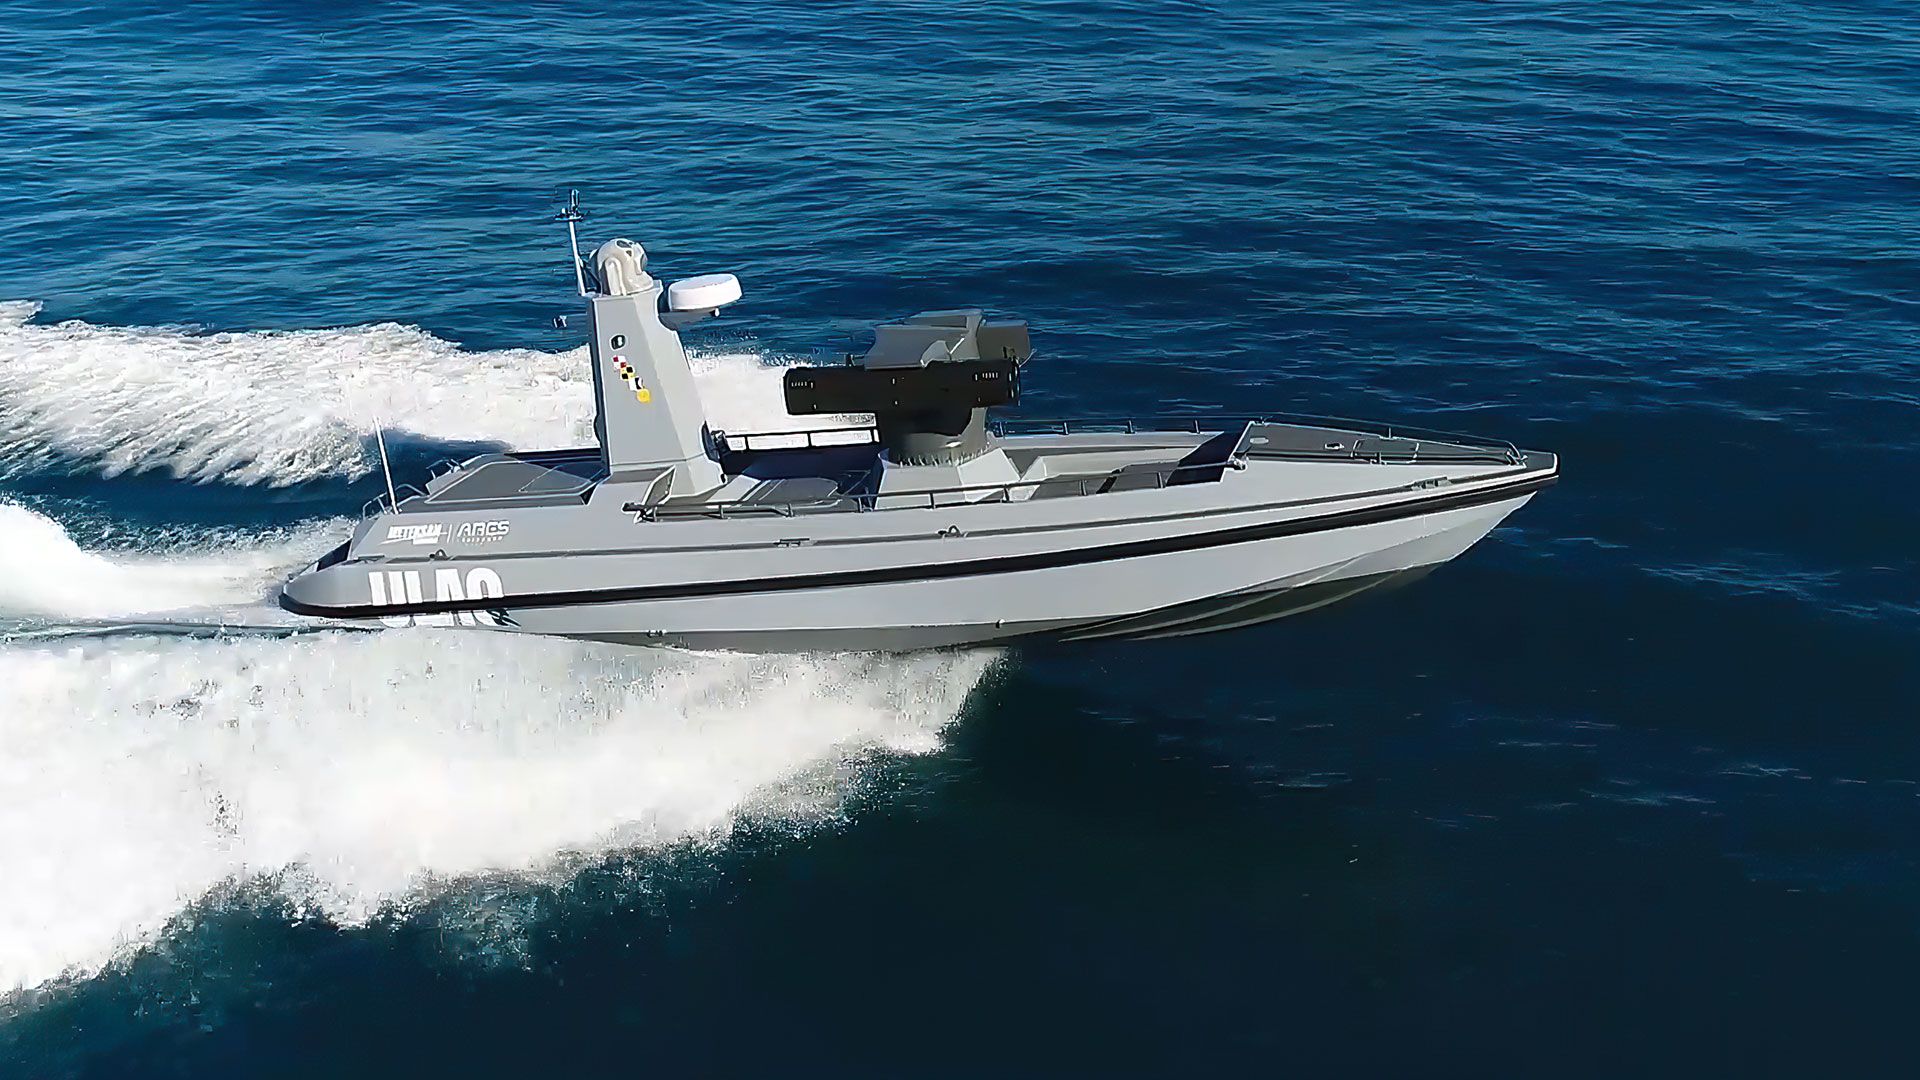 SSB to Supply Unmanned Surface Vehicle